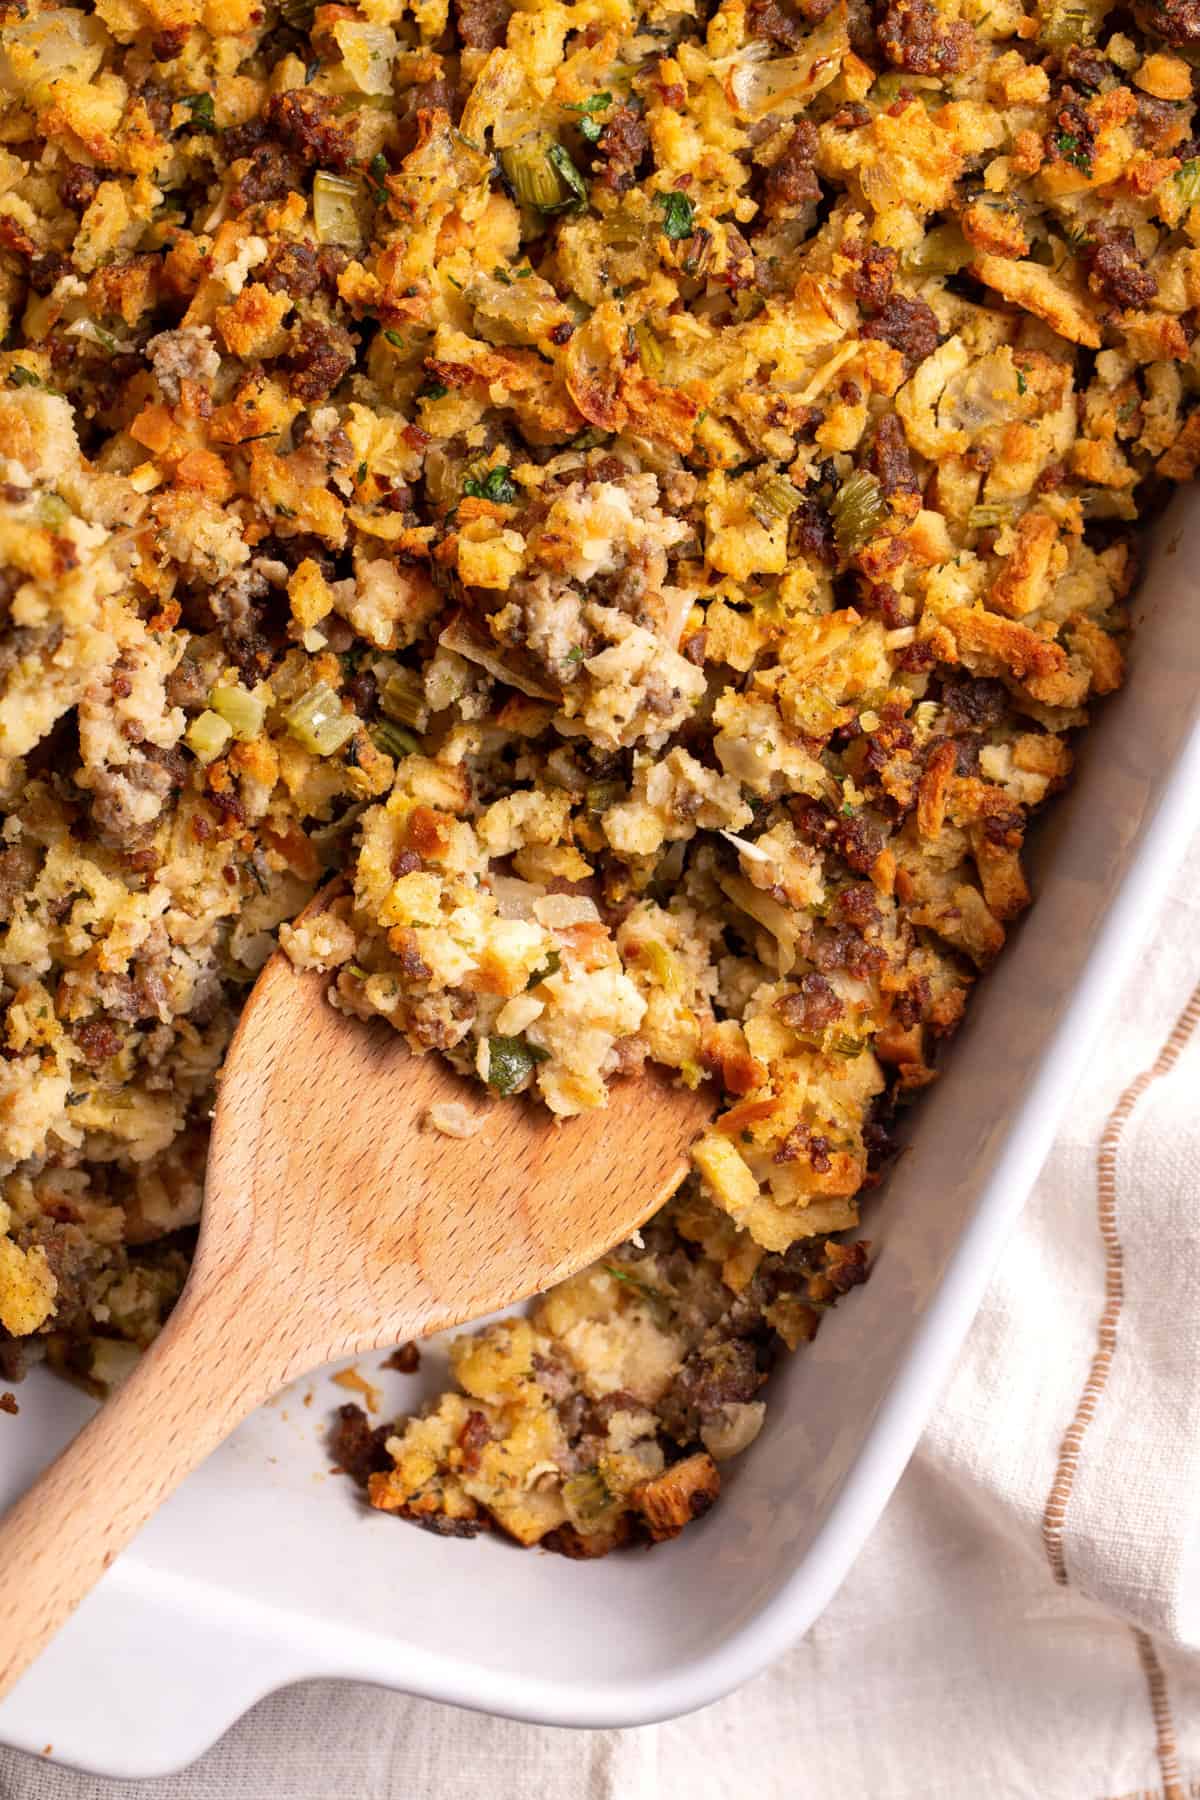 Close up of sausage stuffing served in a casserole dish with a wooden spoon.